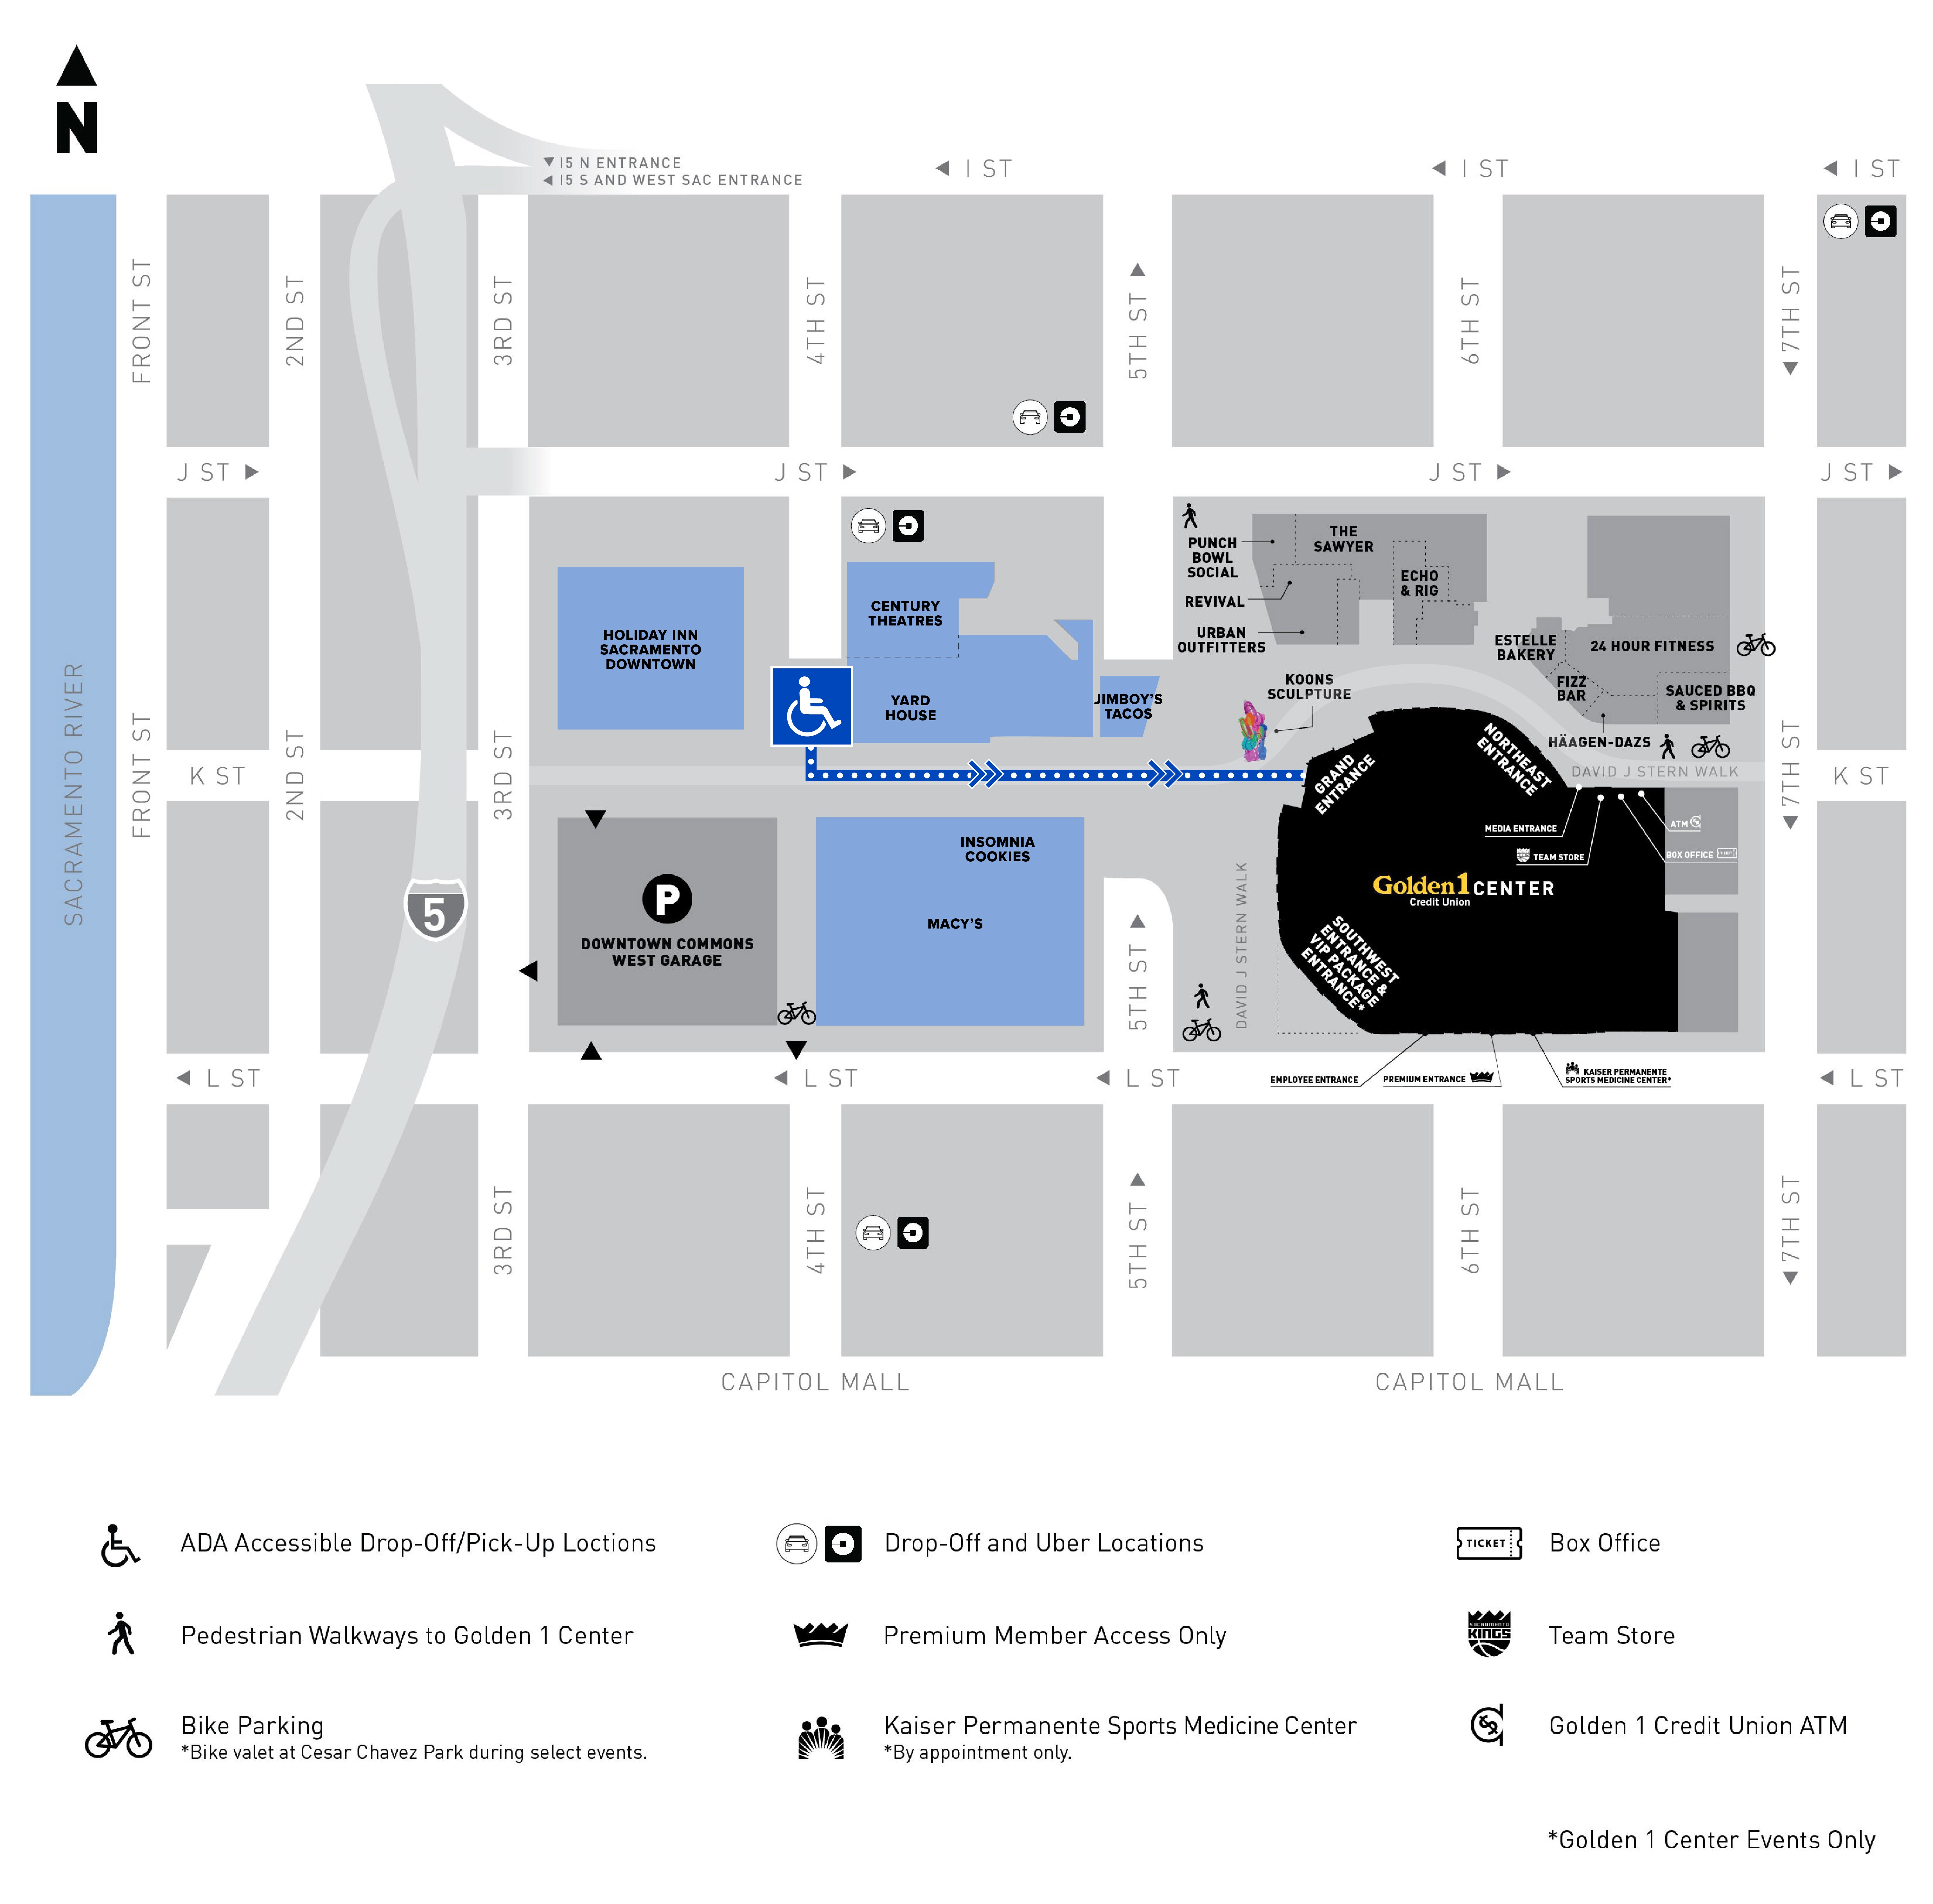 A map showing the location of the Golden 1 Center. a blue handicap symbol is on the intersection of 4th and J street, indicating the accessibility drop off point. A dotted blue line shows the route from the acceesable drop off point and the front entrance of the Golden 1 Center.  